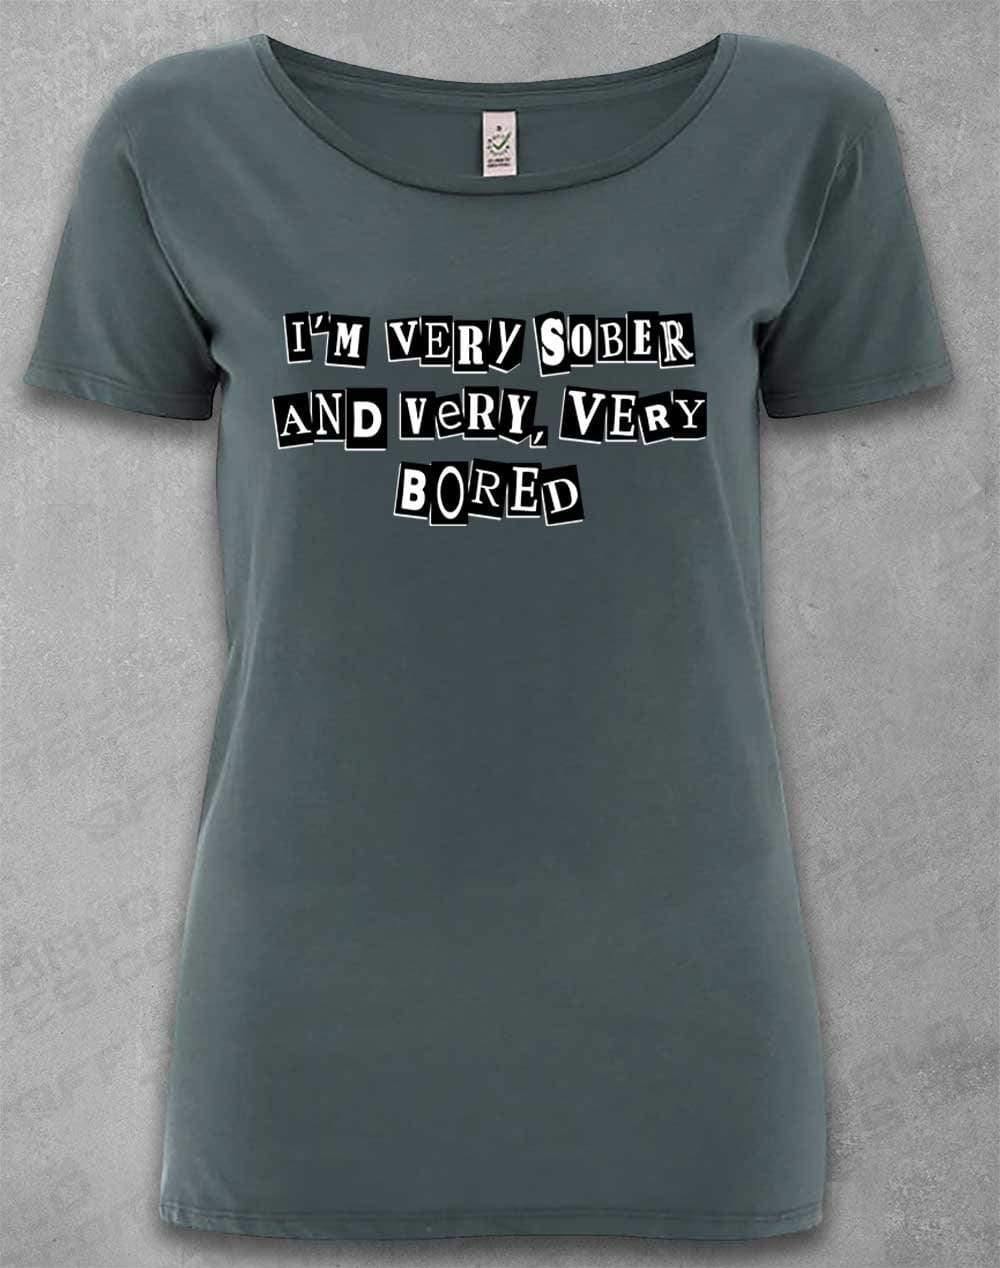 DELUXE I'm Very Sober and Very Very Bored Organic Scoop Neck T-Shirt 8-10 / Light Charcoal  - Off World Tees